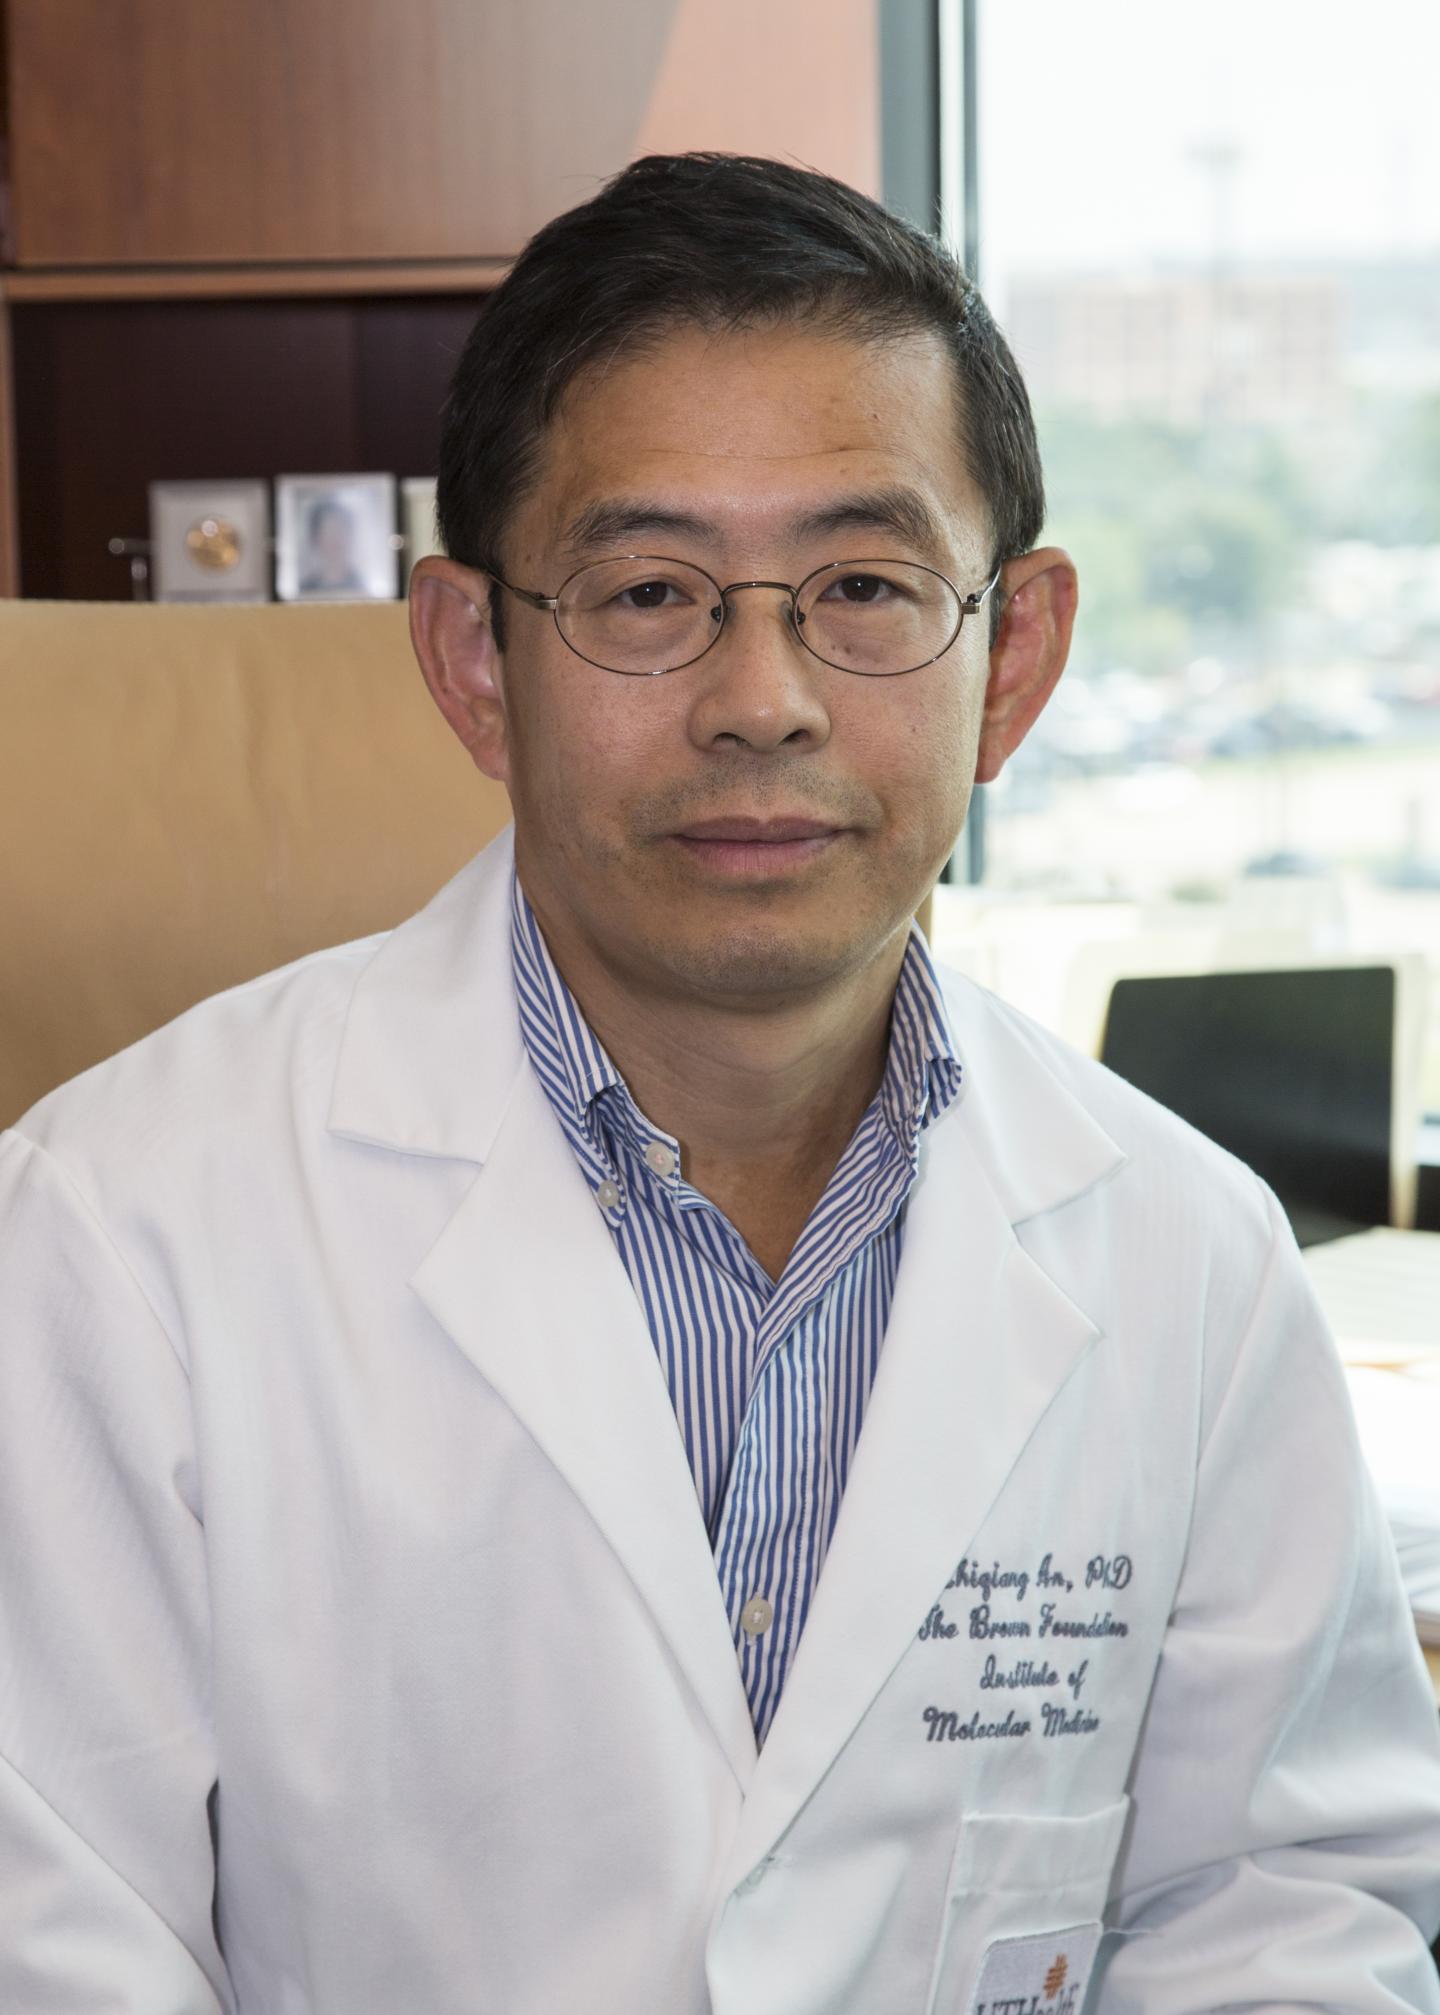 Zhiqiang An, University of Texas Health Science Center at Houston